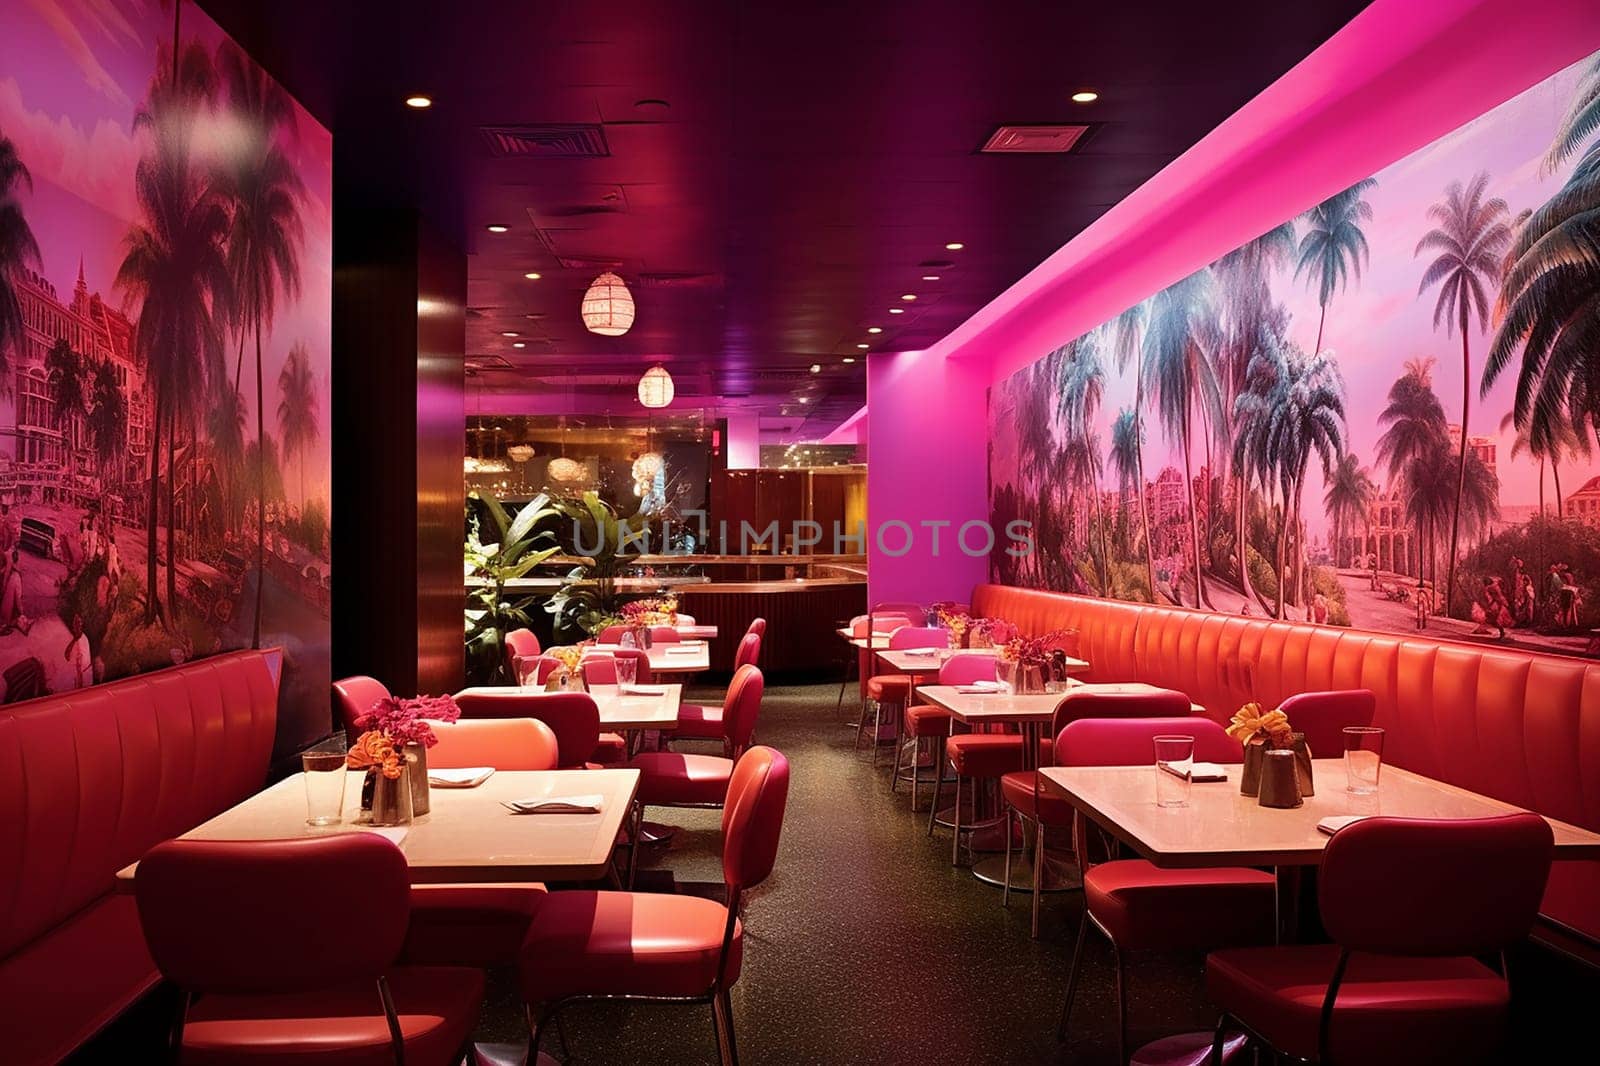 Modern restaurant interior with pink neon lighting, tropical wall murals, and cozy seating arrangement.